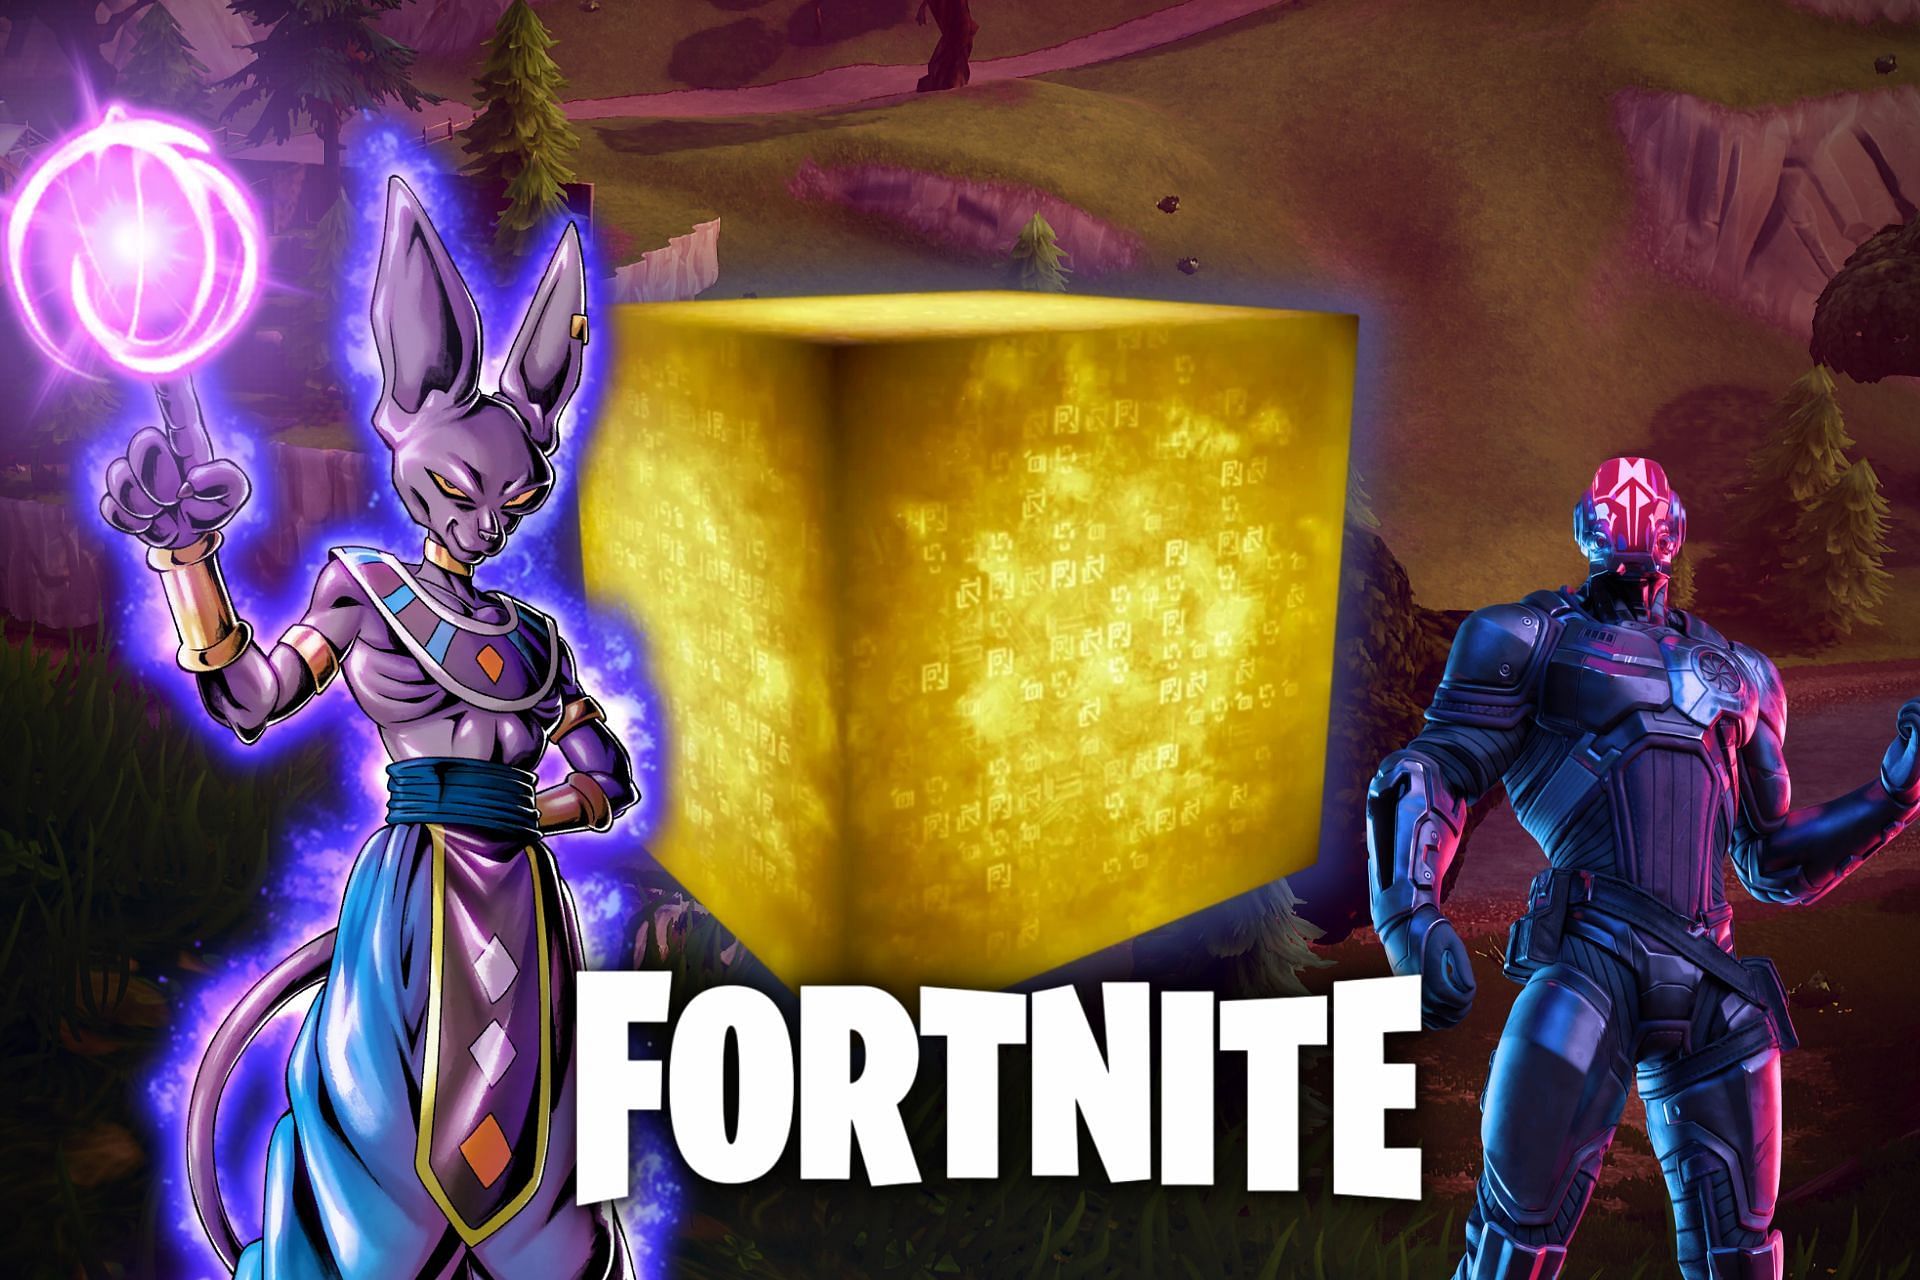 Characters that can defeat the Queen cube in Fortnite (Image via Sportskeeda)